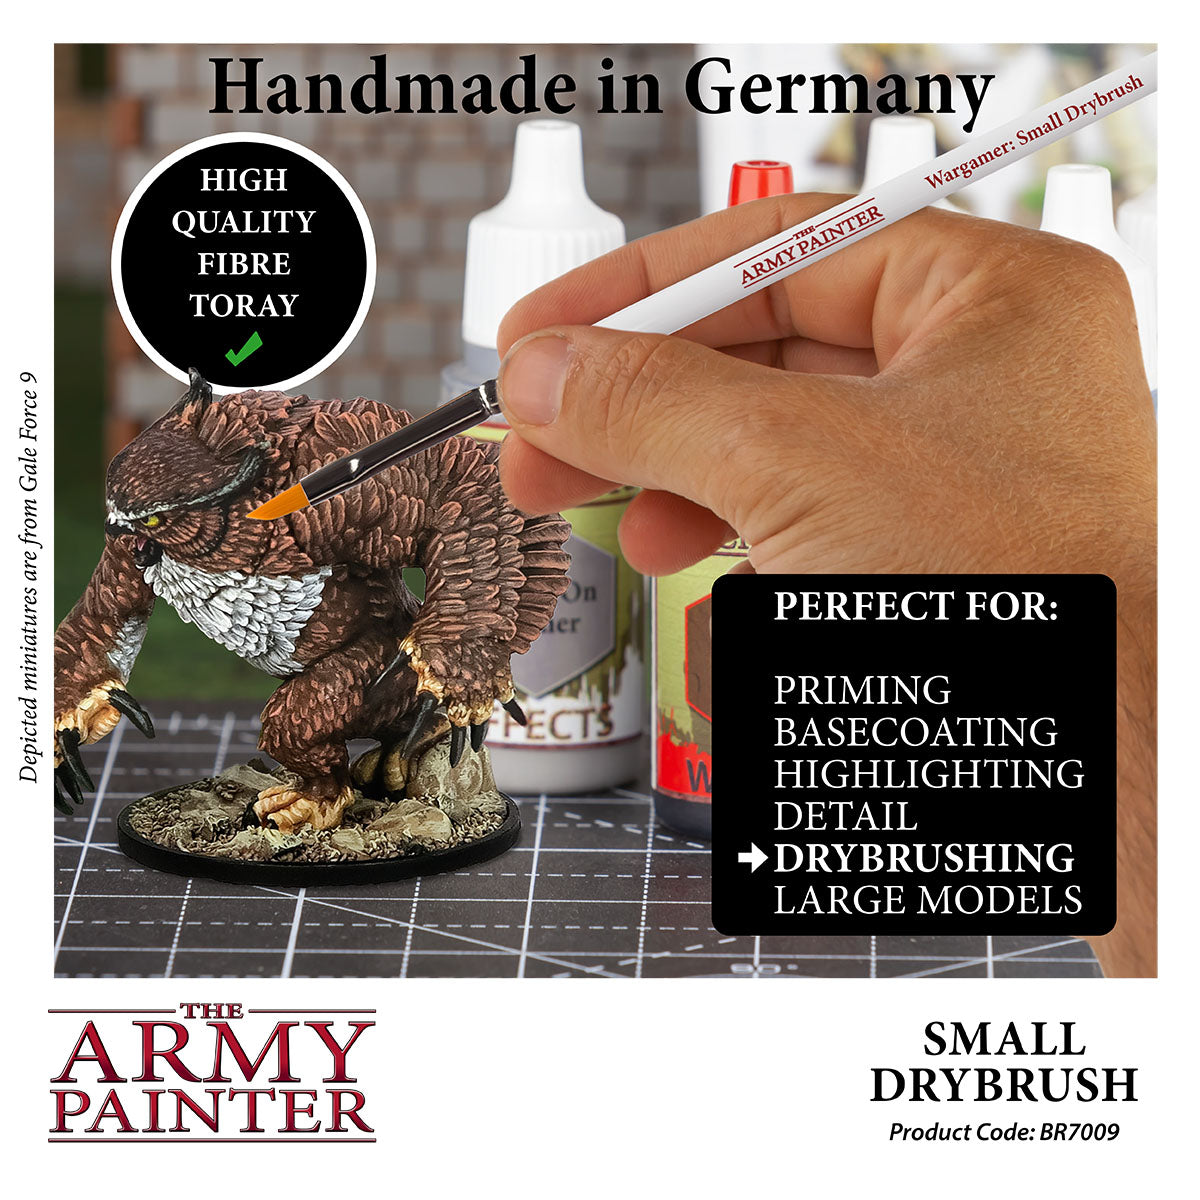 The Army Painter - Wargamer Small Drybrush BR7009